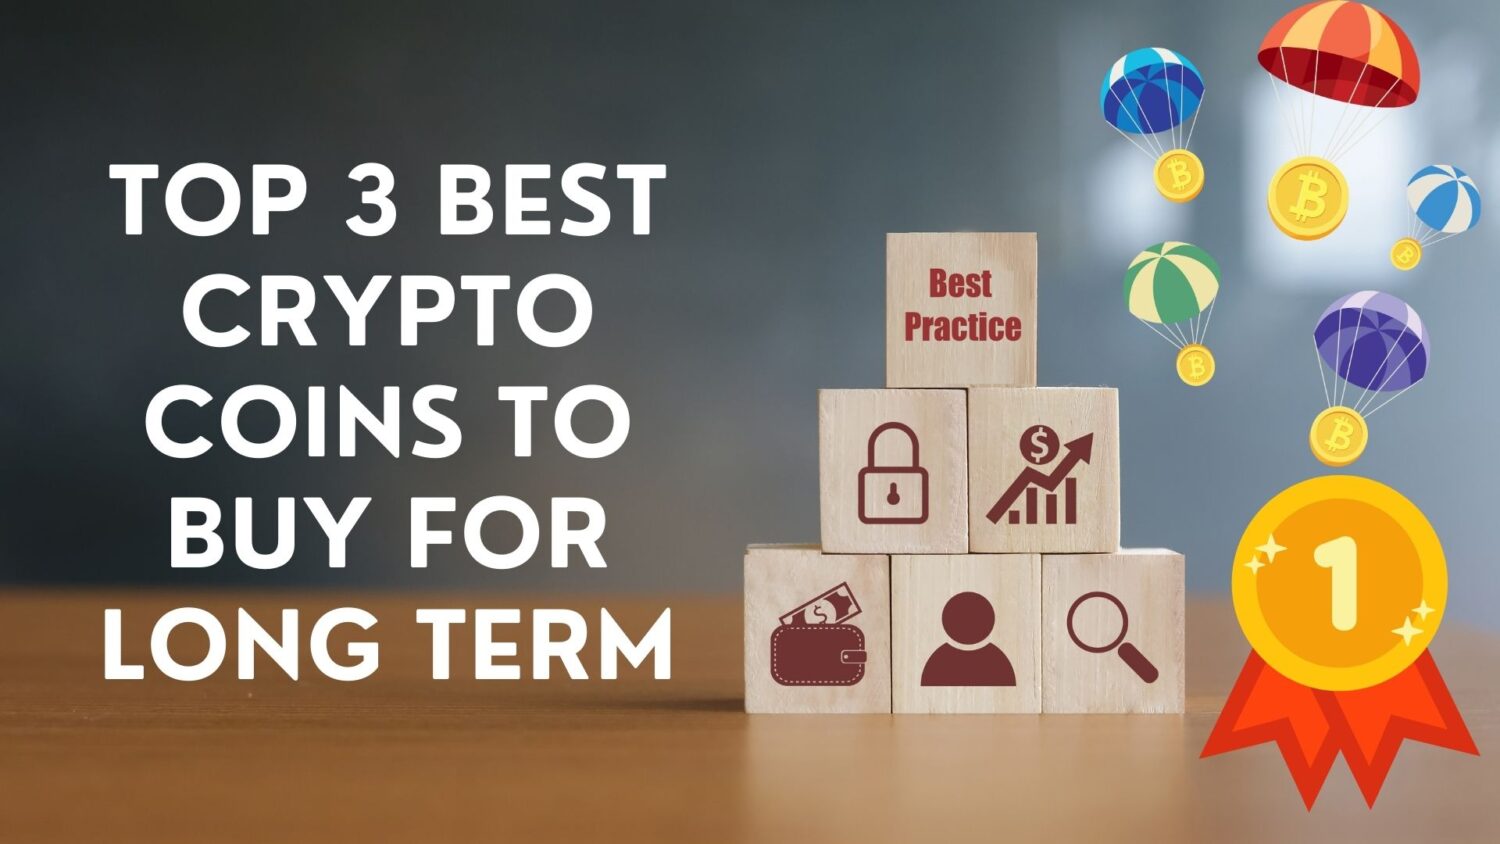 Top 3 Best Crypto Coins To Buy For Long Term